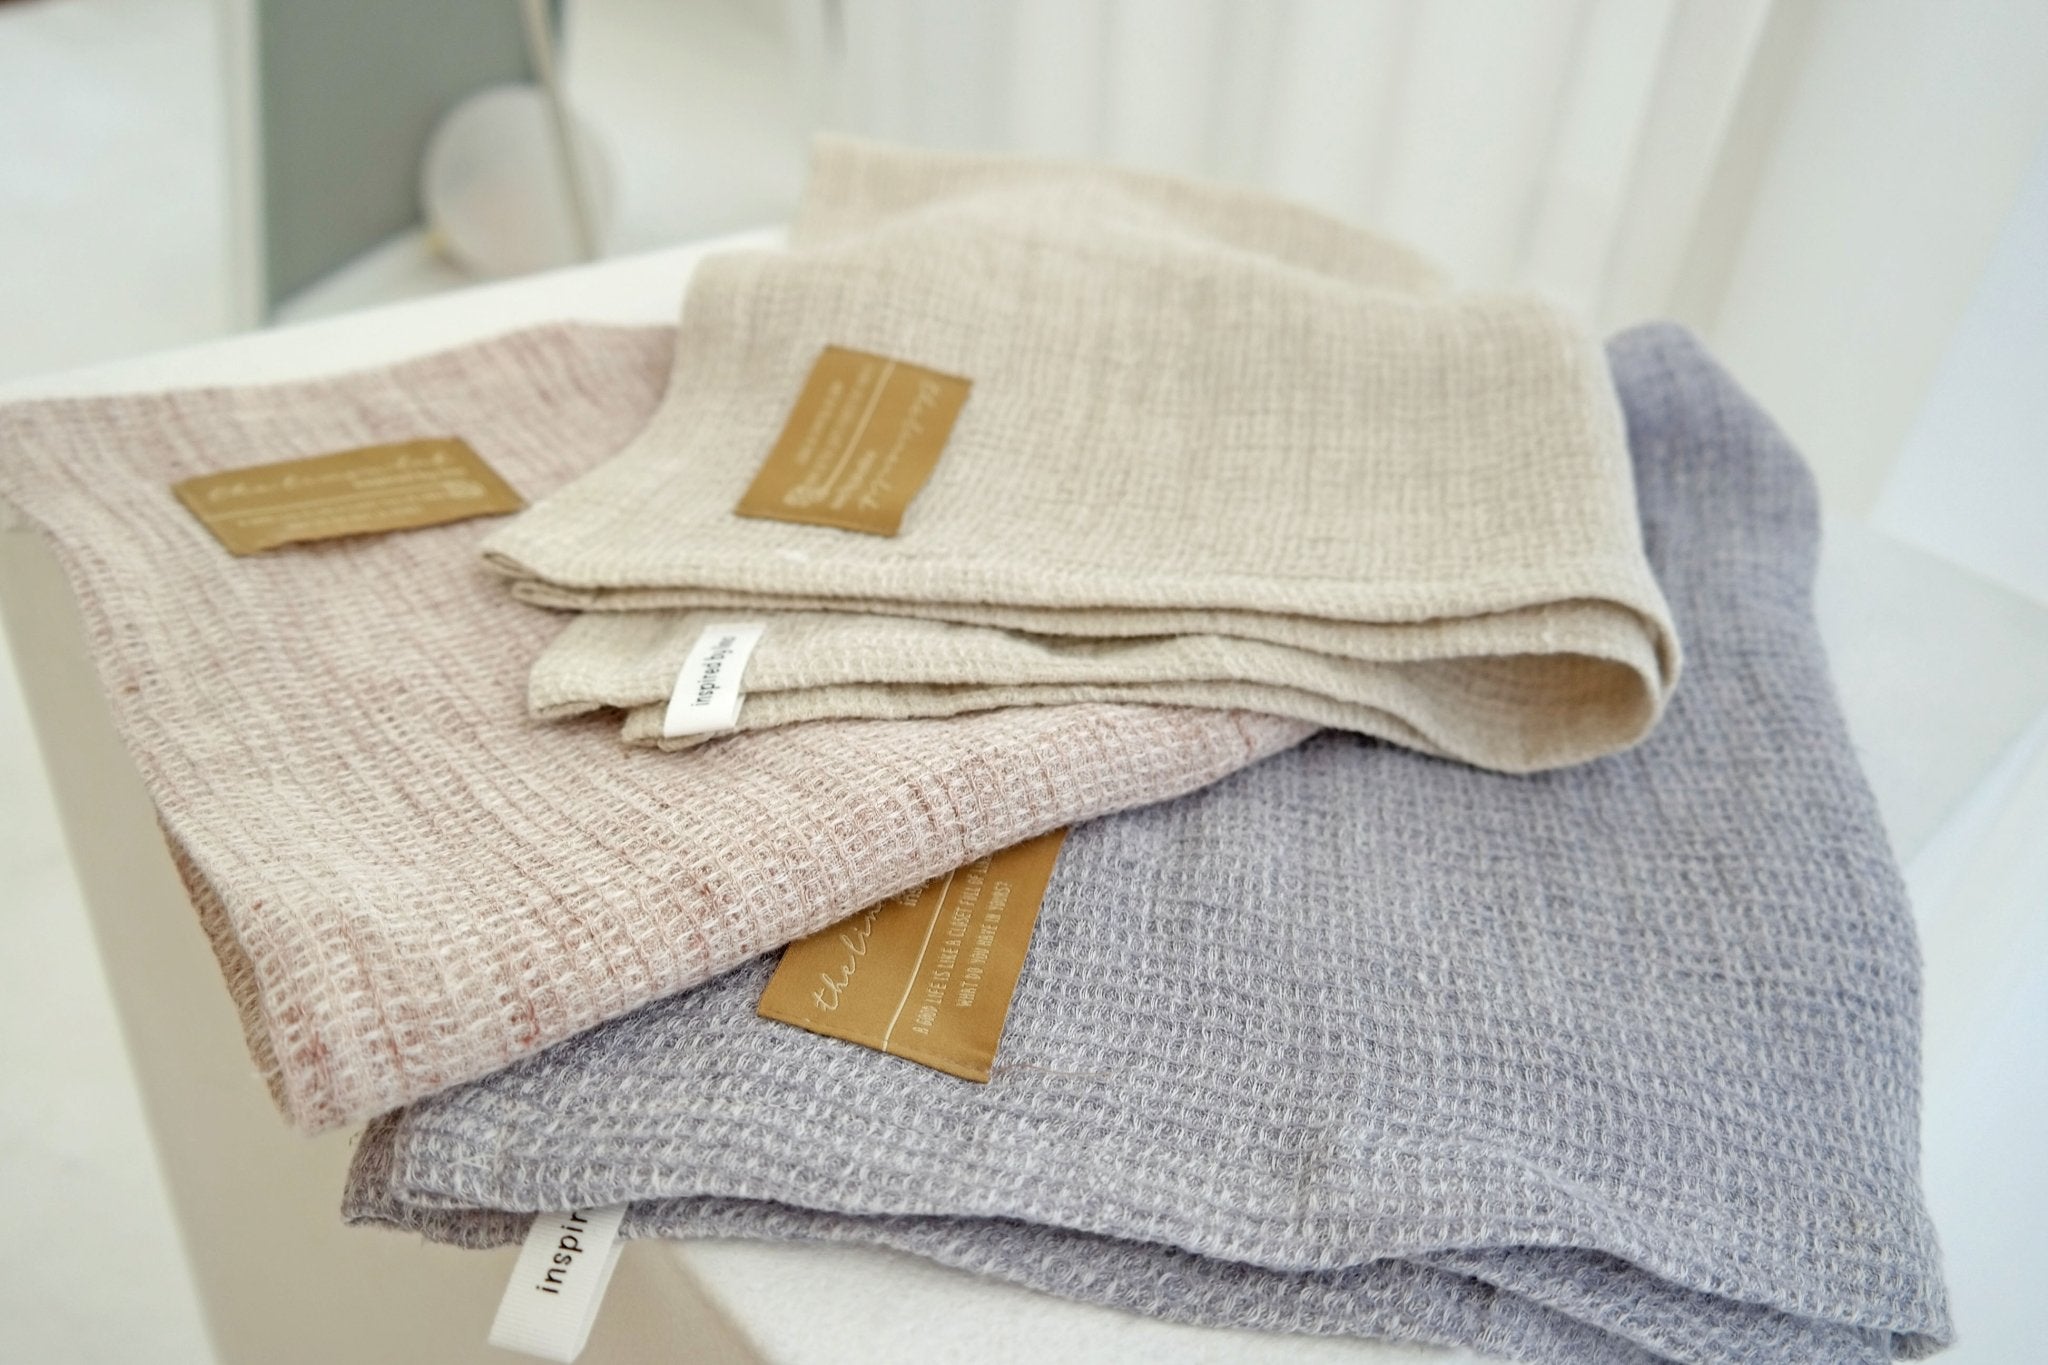 Linen Products - The Linen Lab